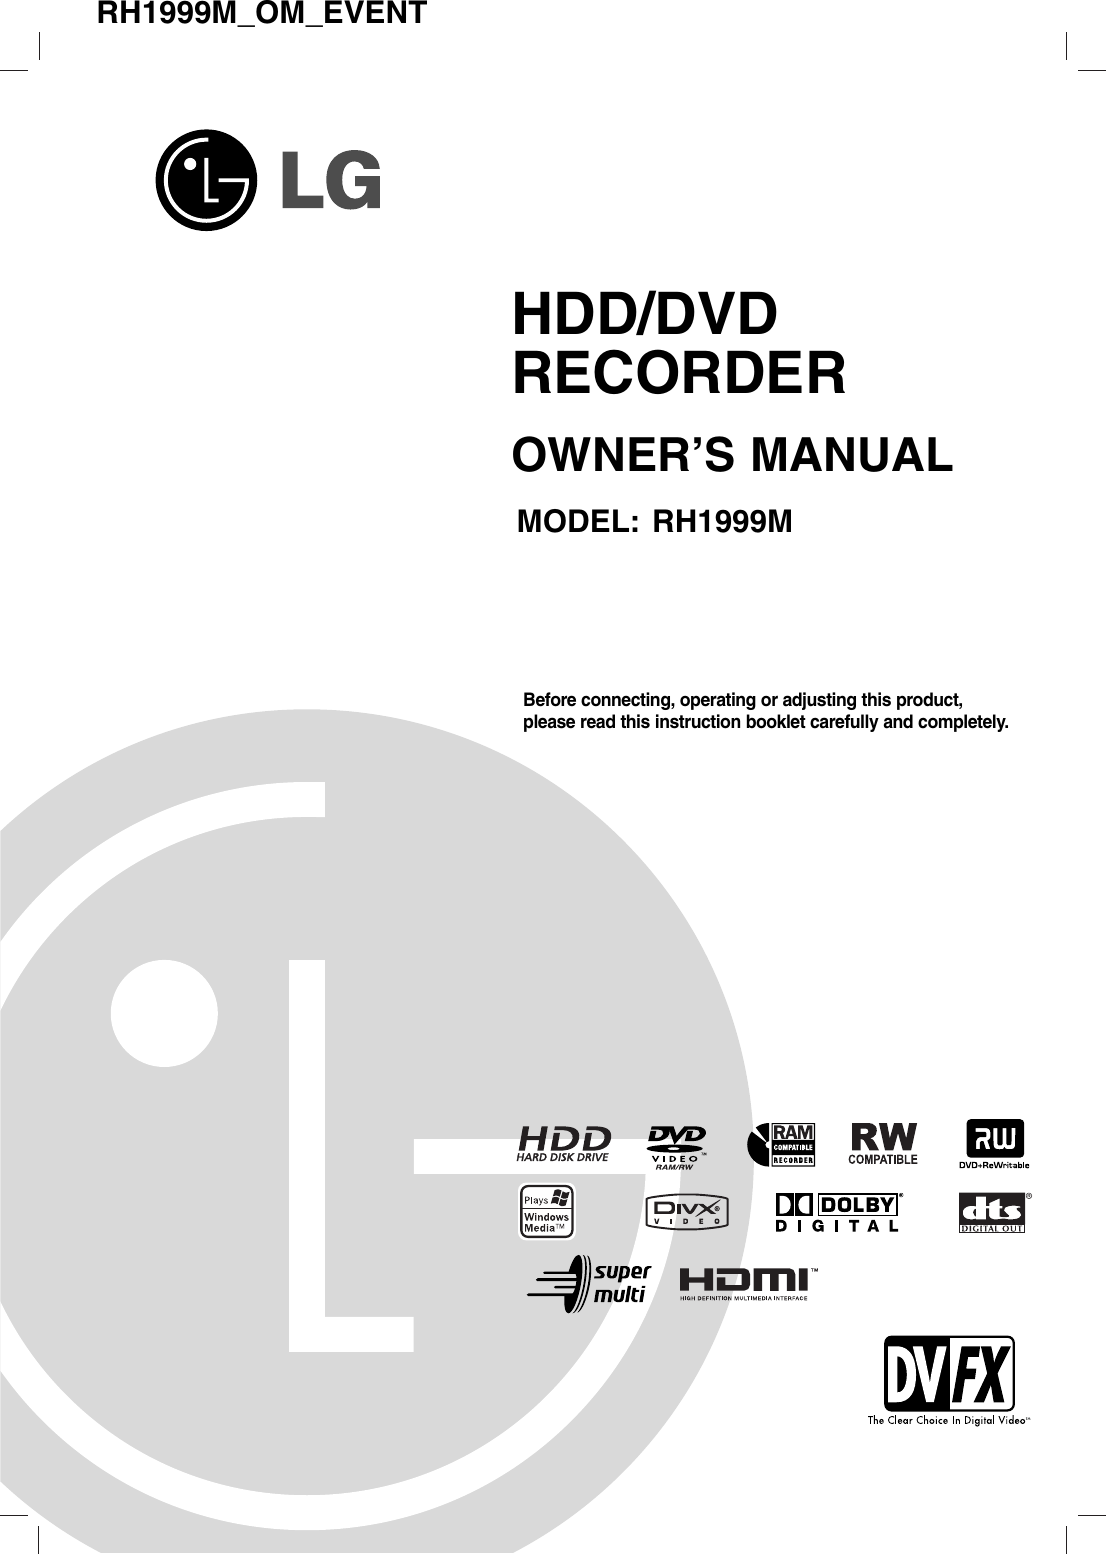 HDD/DVDRECORDEROWNER’S MANUALMODEL: RH1999MBefore connecting, operating or adjusting this product,please read this instruction booklet carefully and completely.RH1999M_OM_EVENT